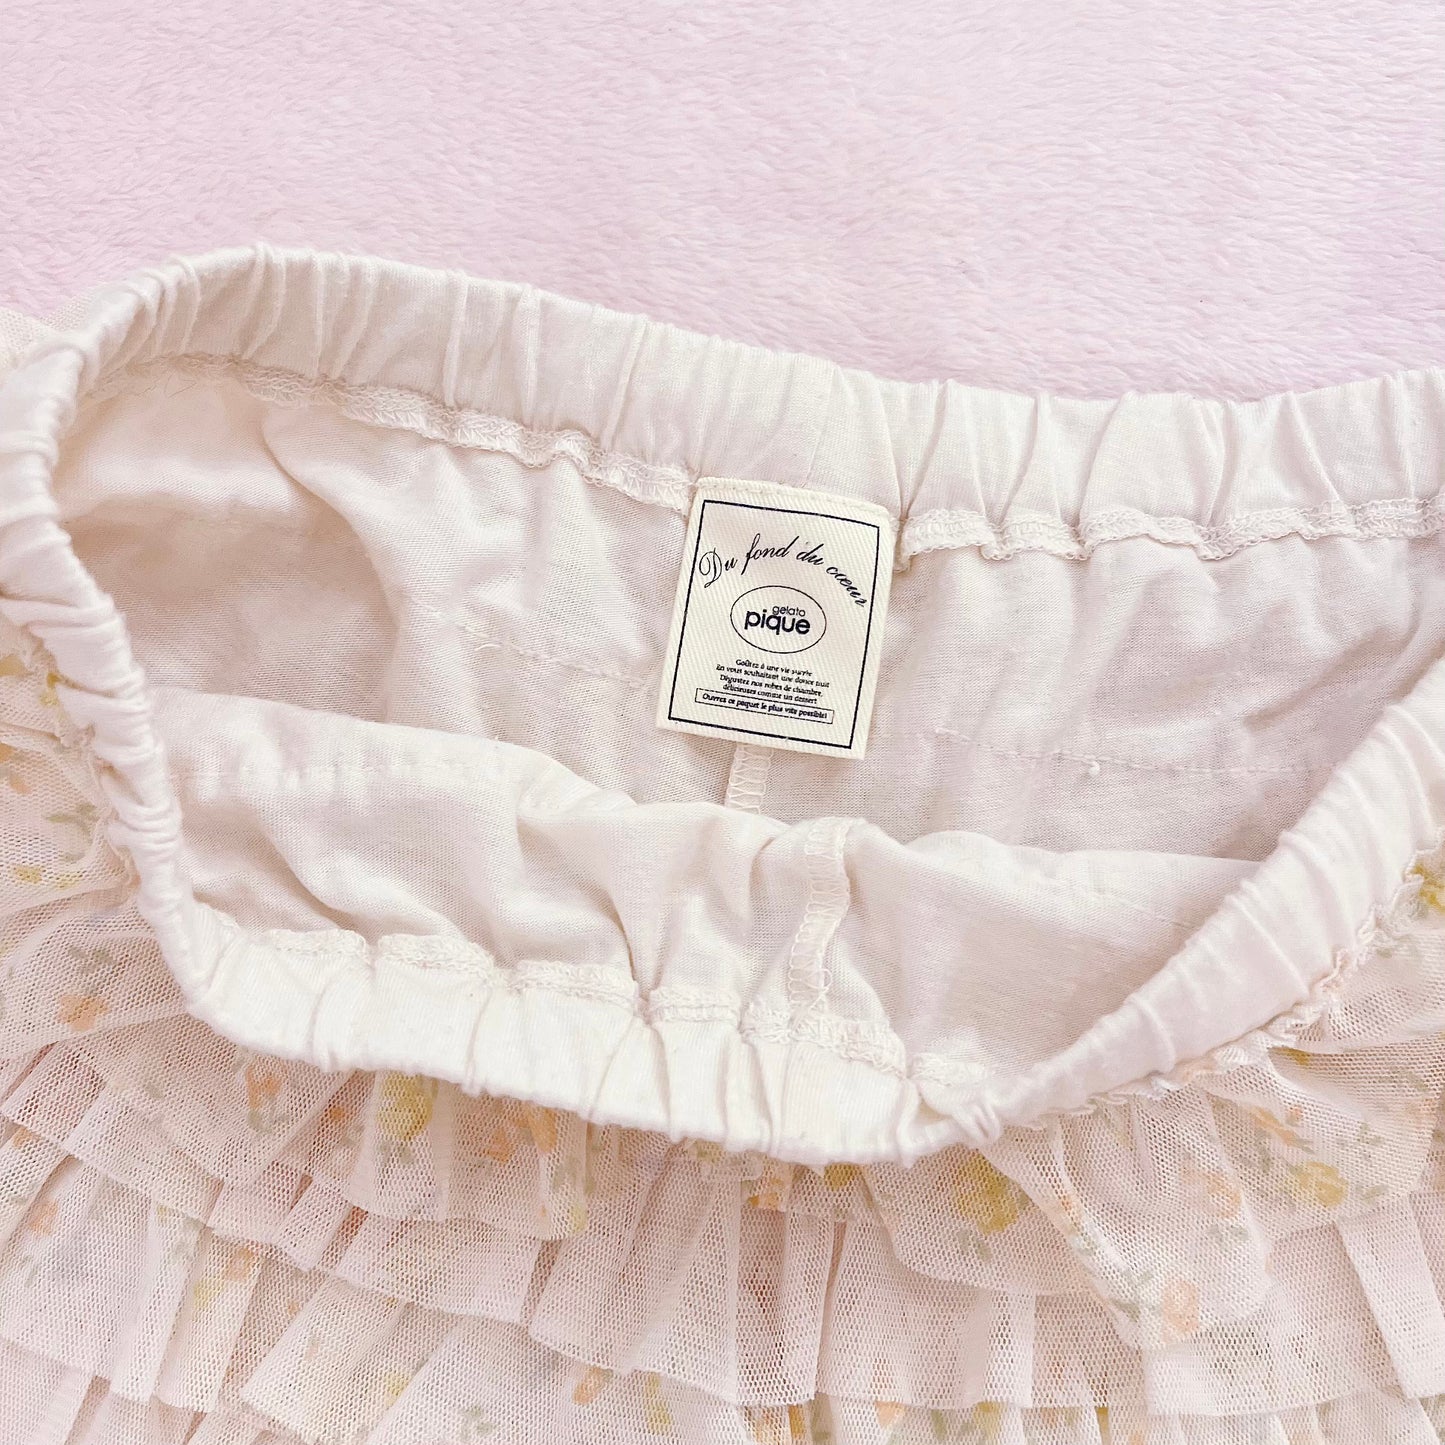 cream floral ruffle bloomers